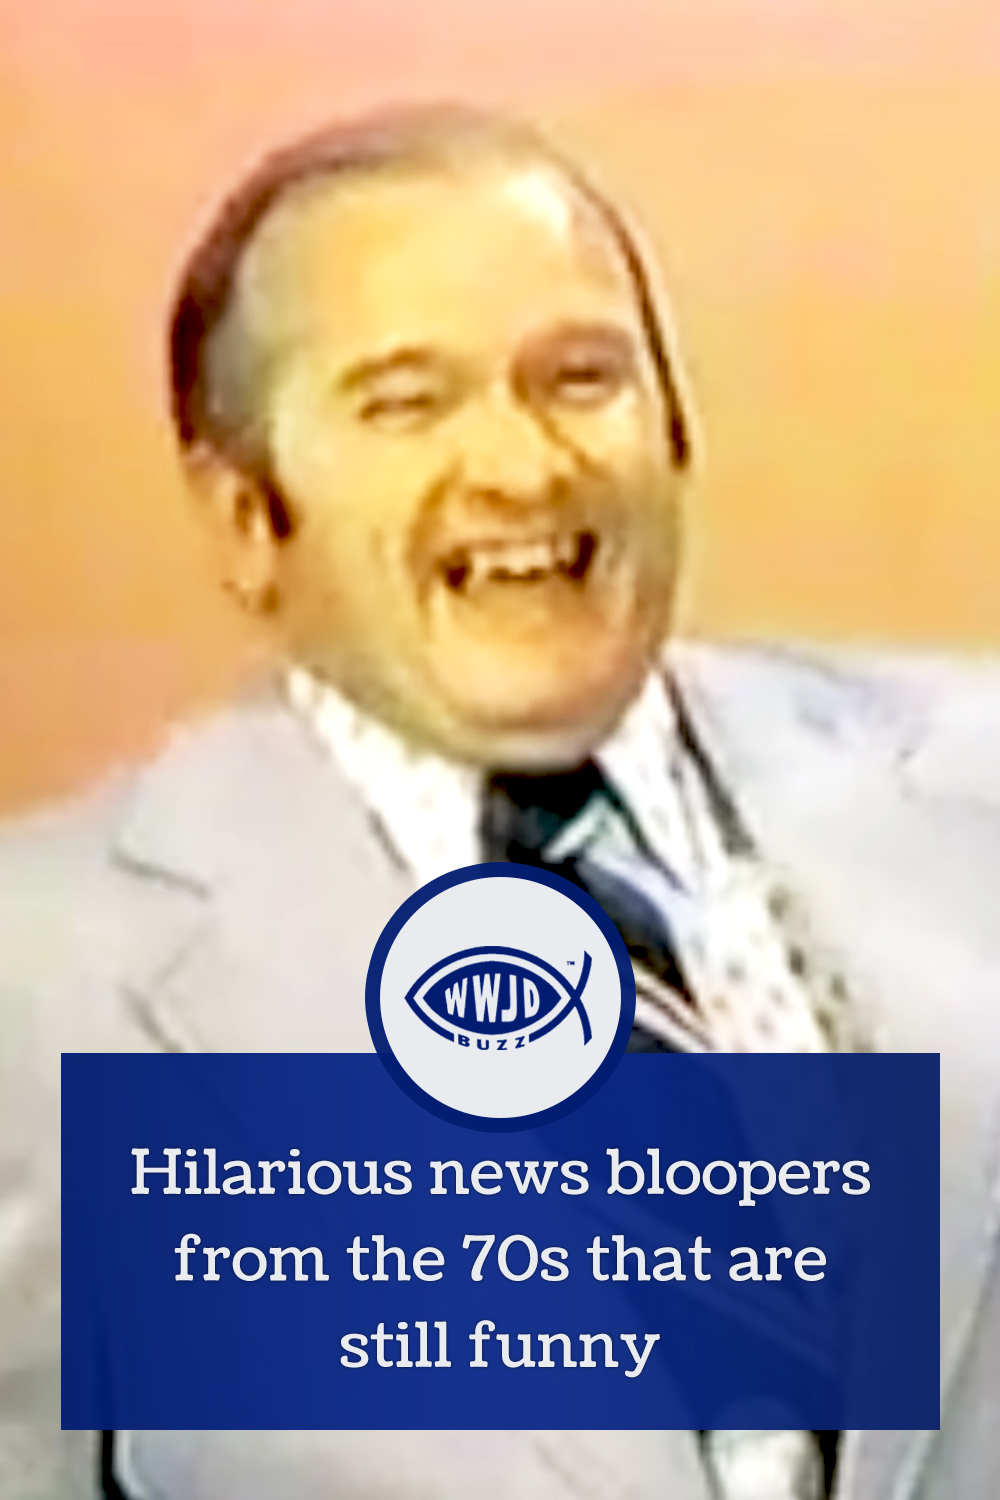 Hilarious news bloopers from the 70s that are still funny